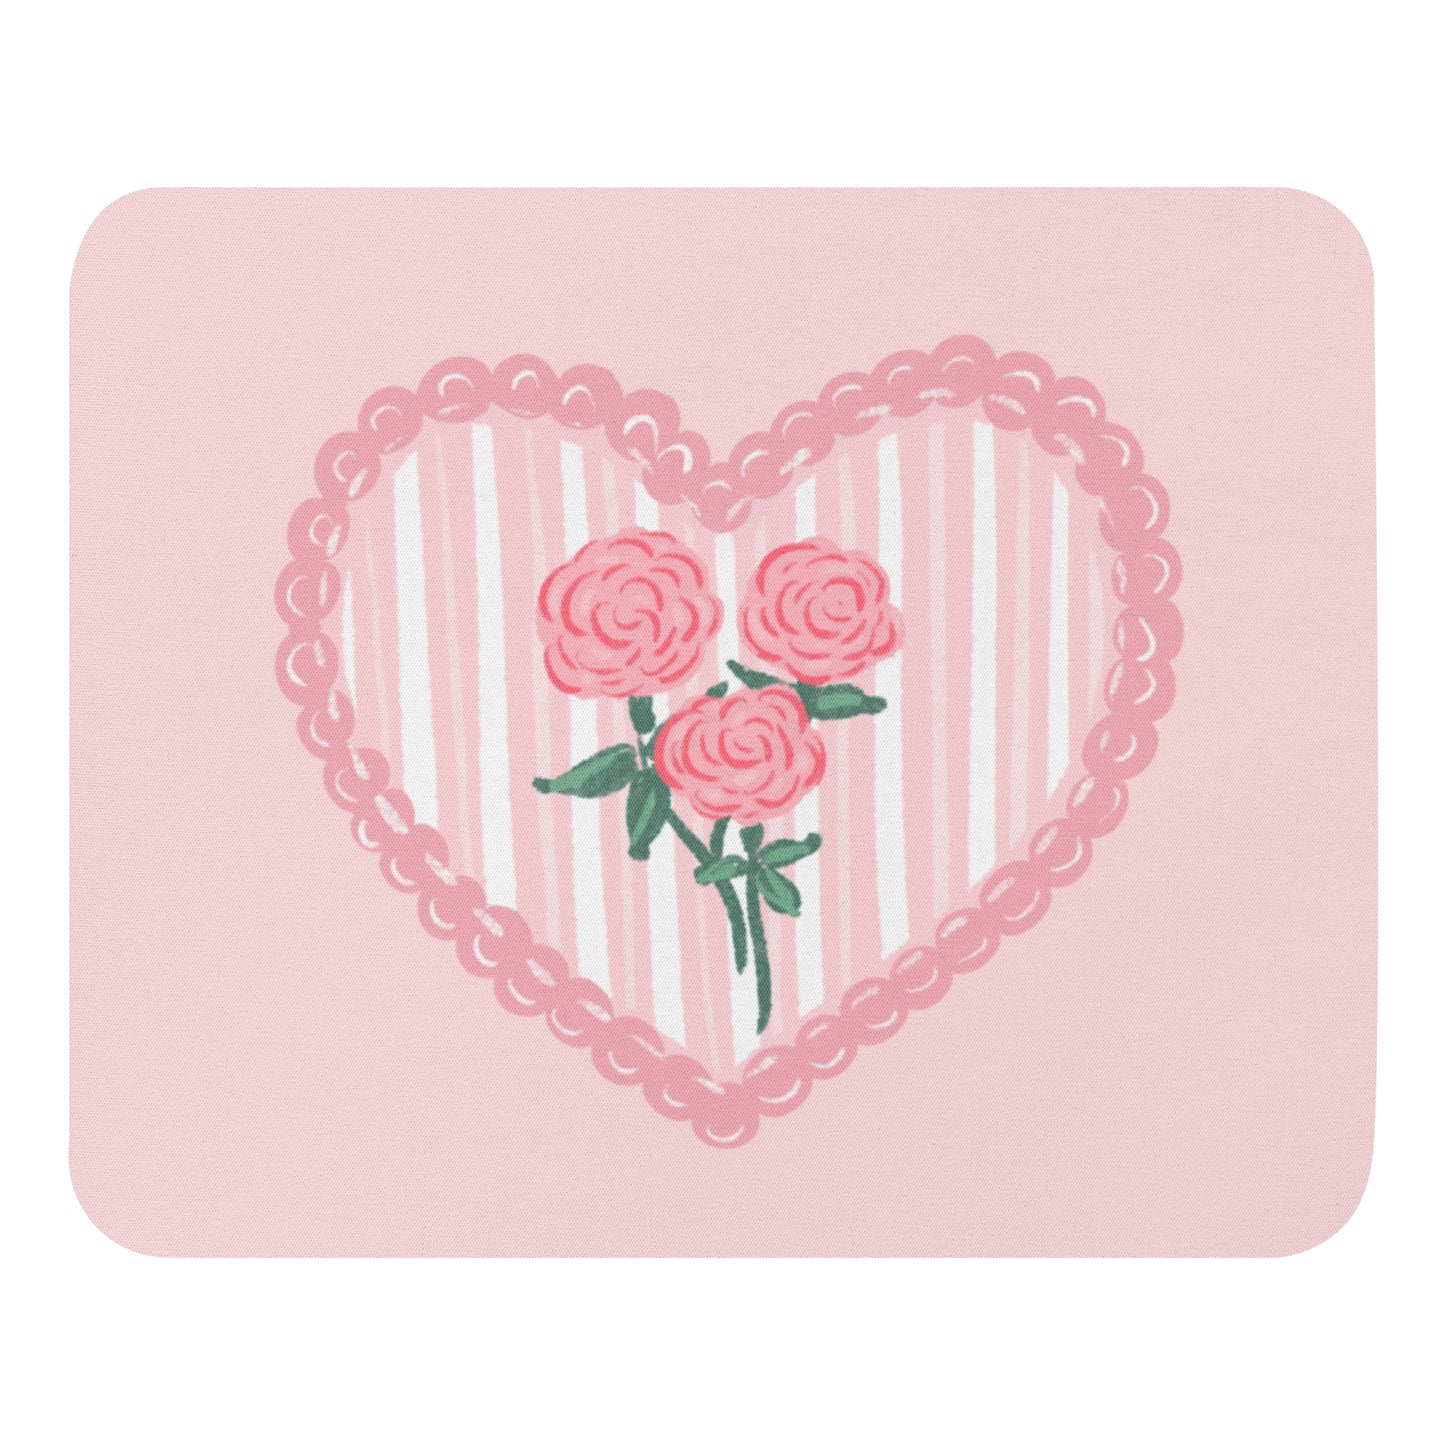 Stems & Stripes Pink Mouse Pad